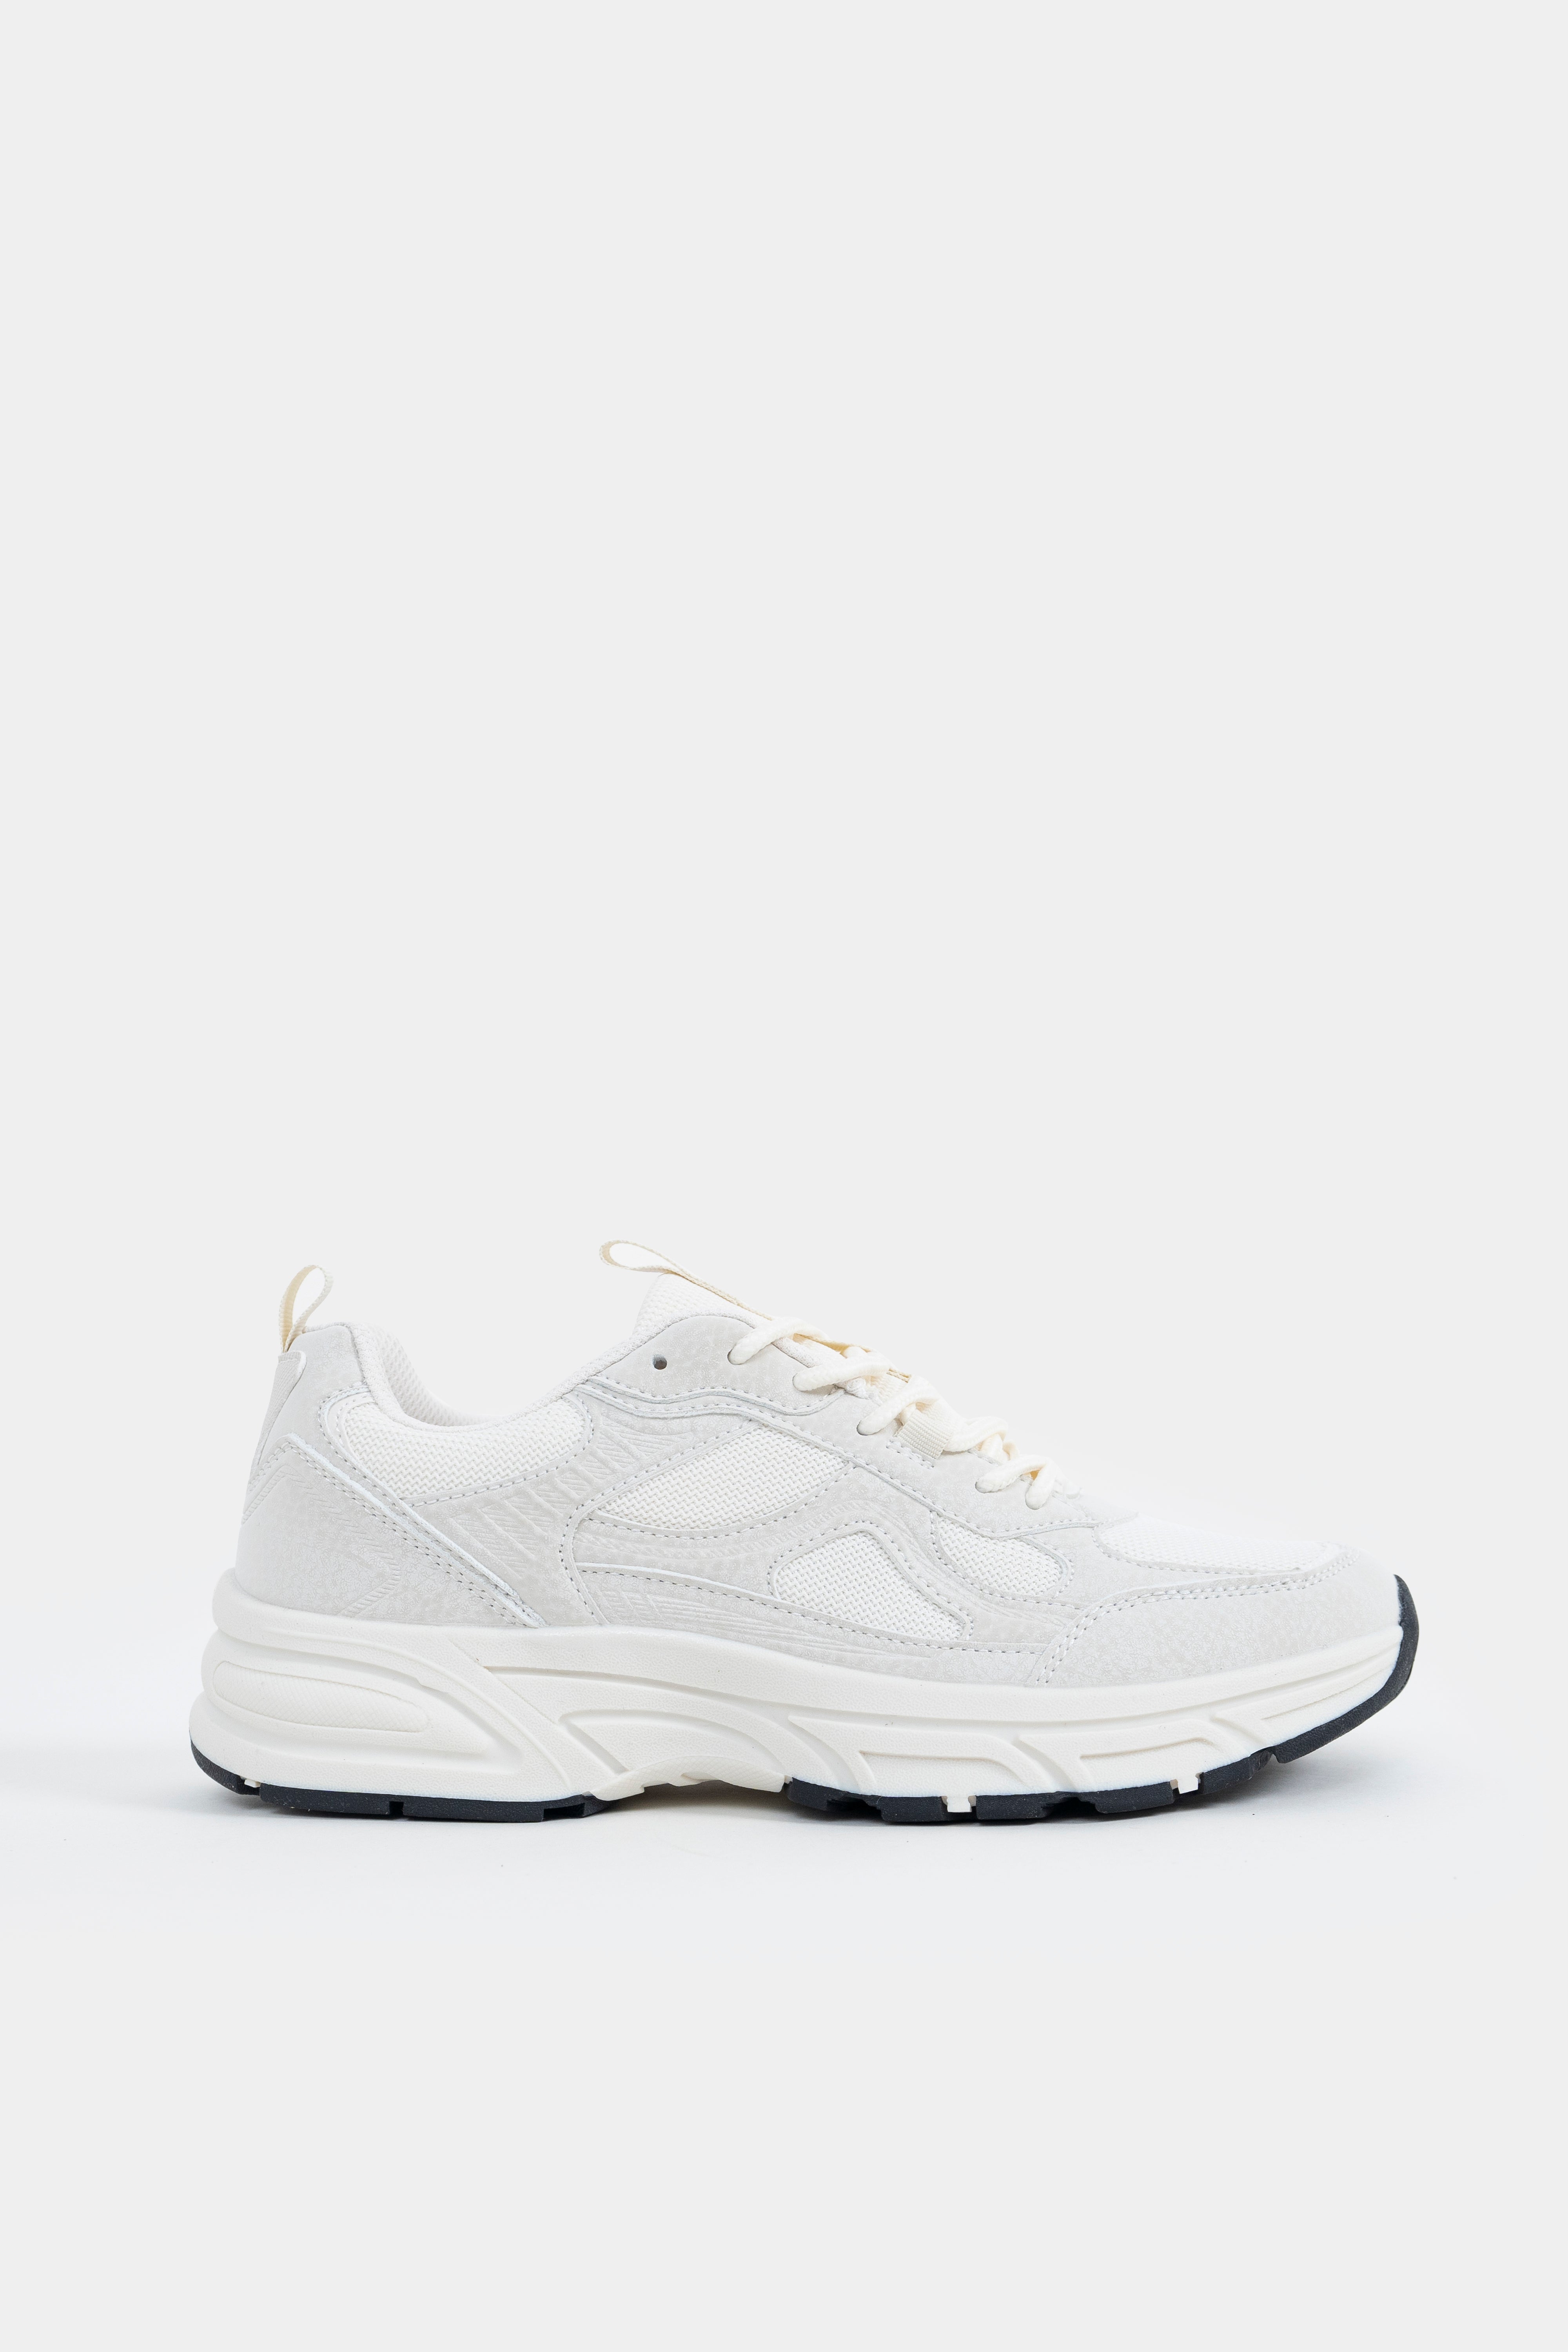 Contrast Chunky Running Shoes